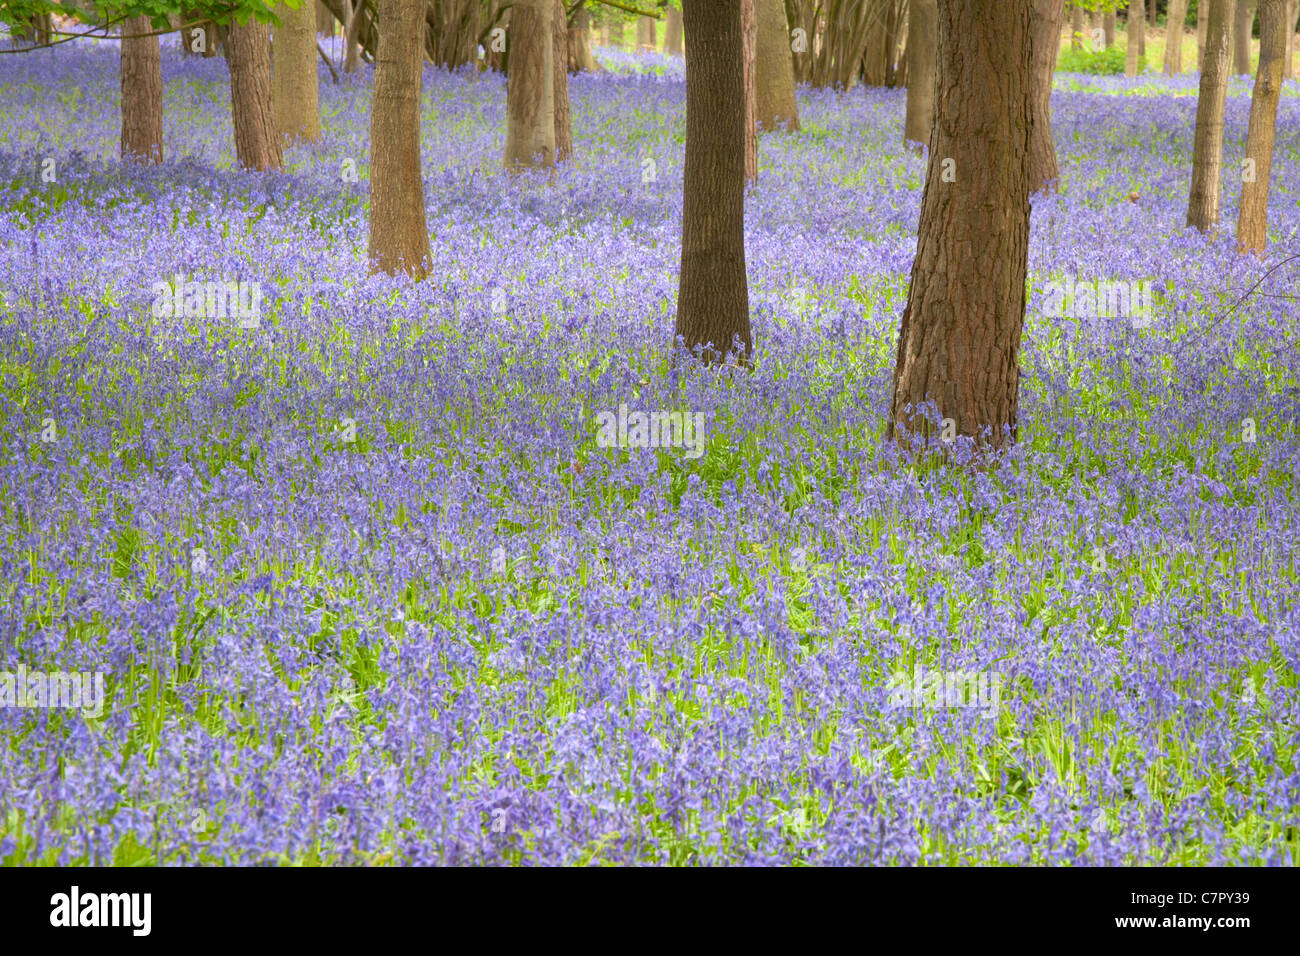 BLUEBELL CAMPI NEL PARCO HAUGHLEY Foto Stock